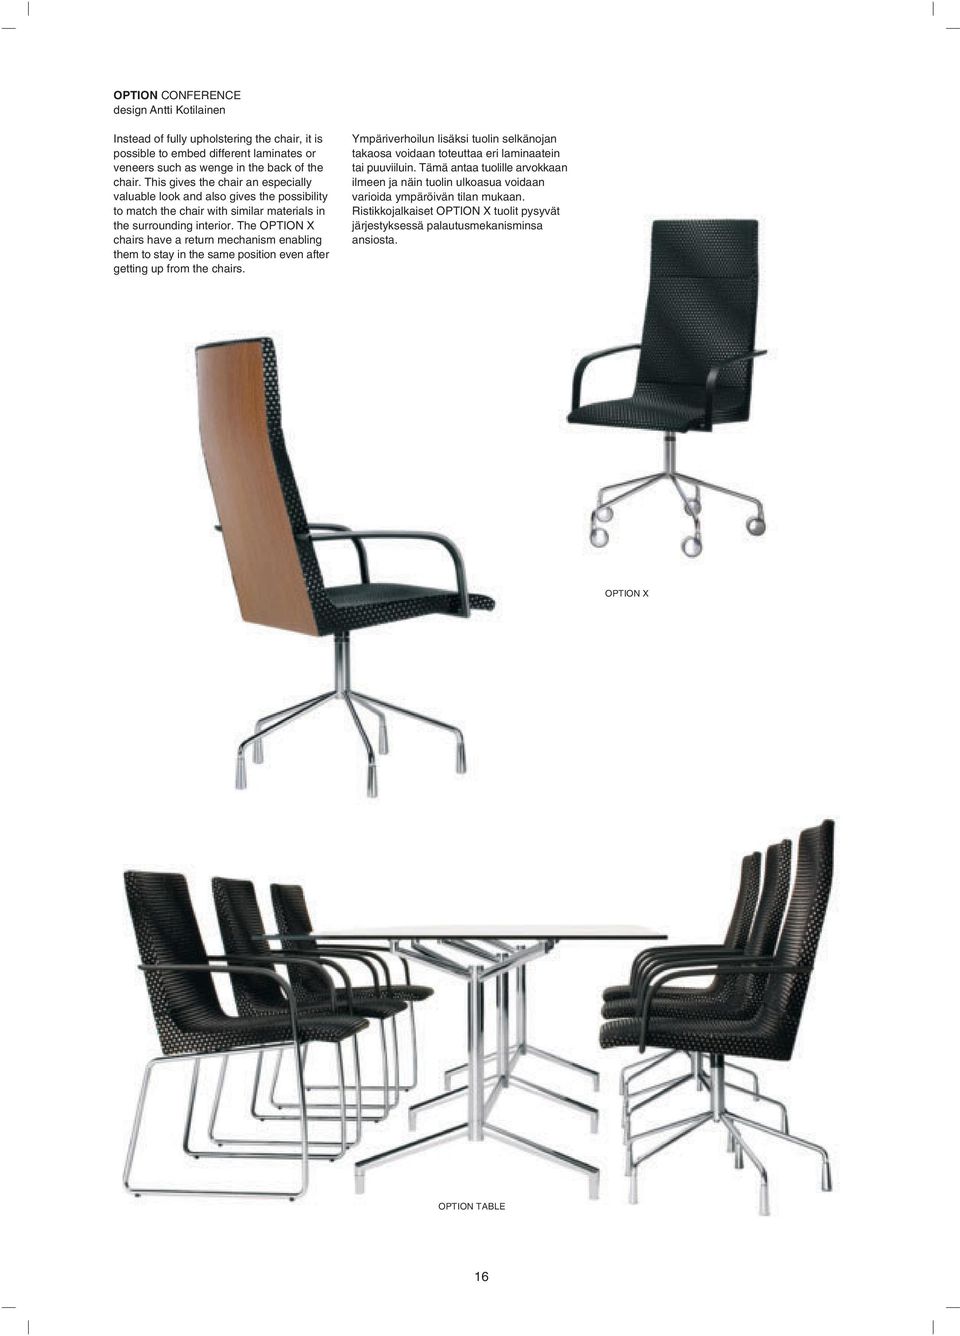 The OPTION X chairs have a return mechanism enabling them to stay in the same position even after getting up from the chairs.